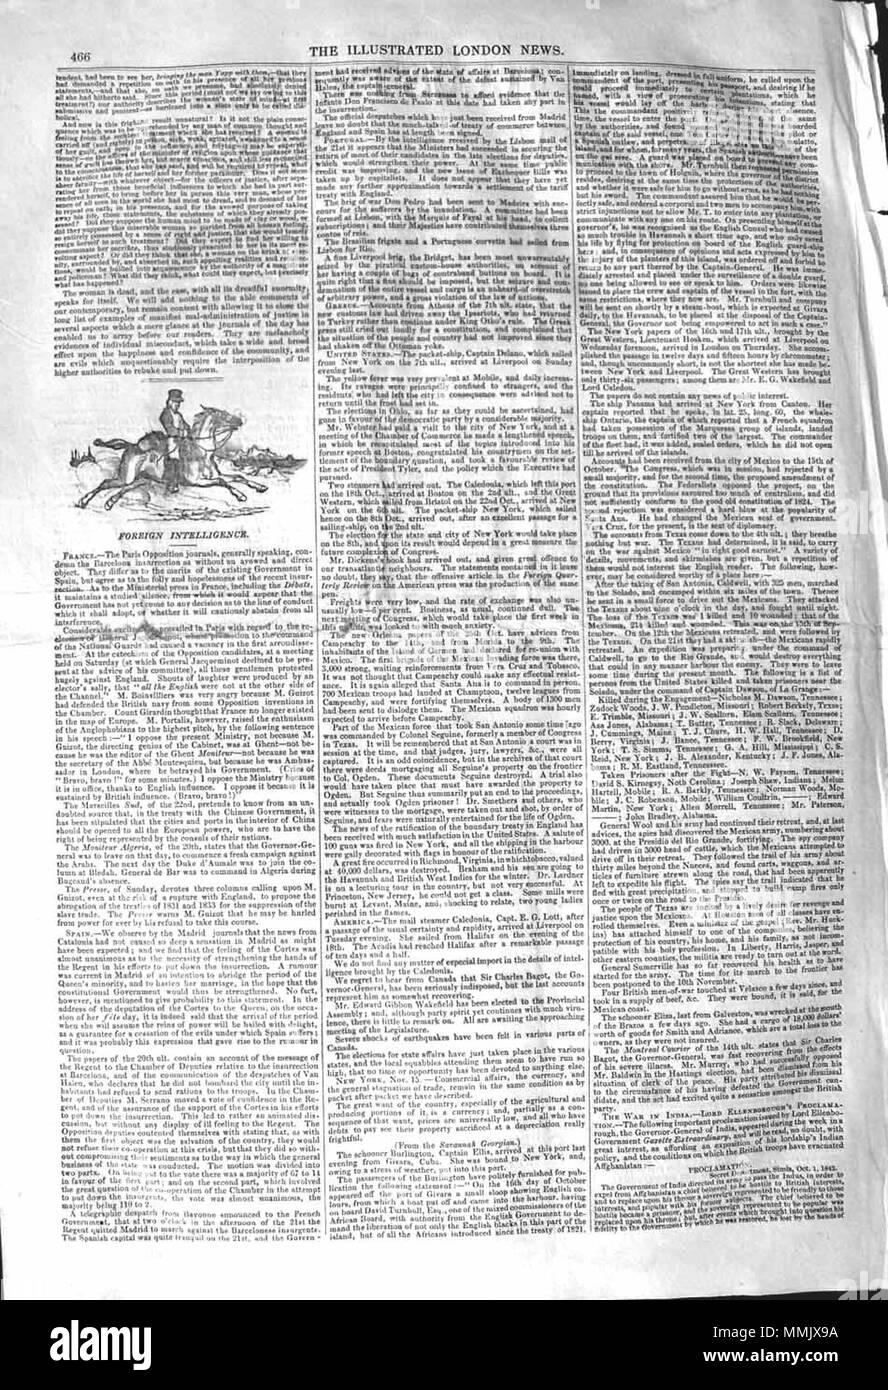 . The Illustrated London News, 1842, p. 466  . 3 December 1842. Unknown ILN 1842, p. 466 Stock Photo